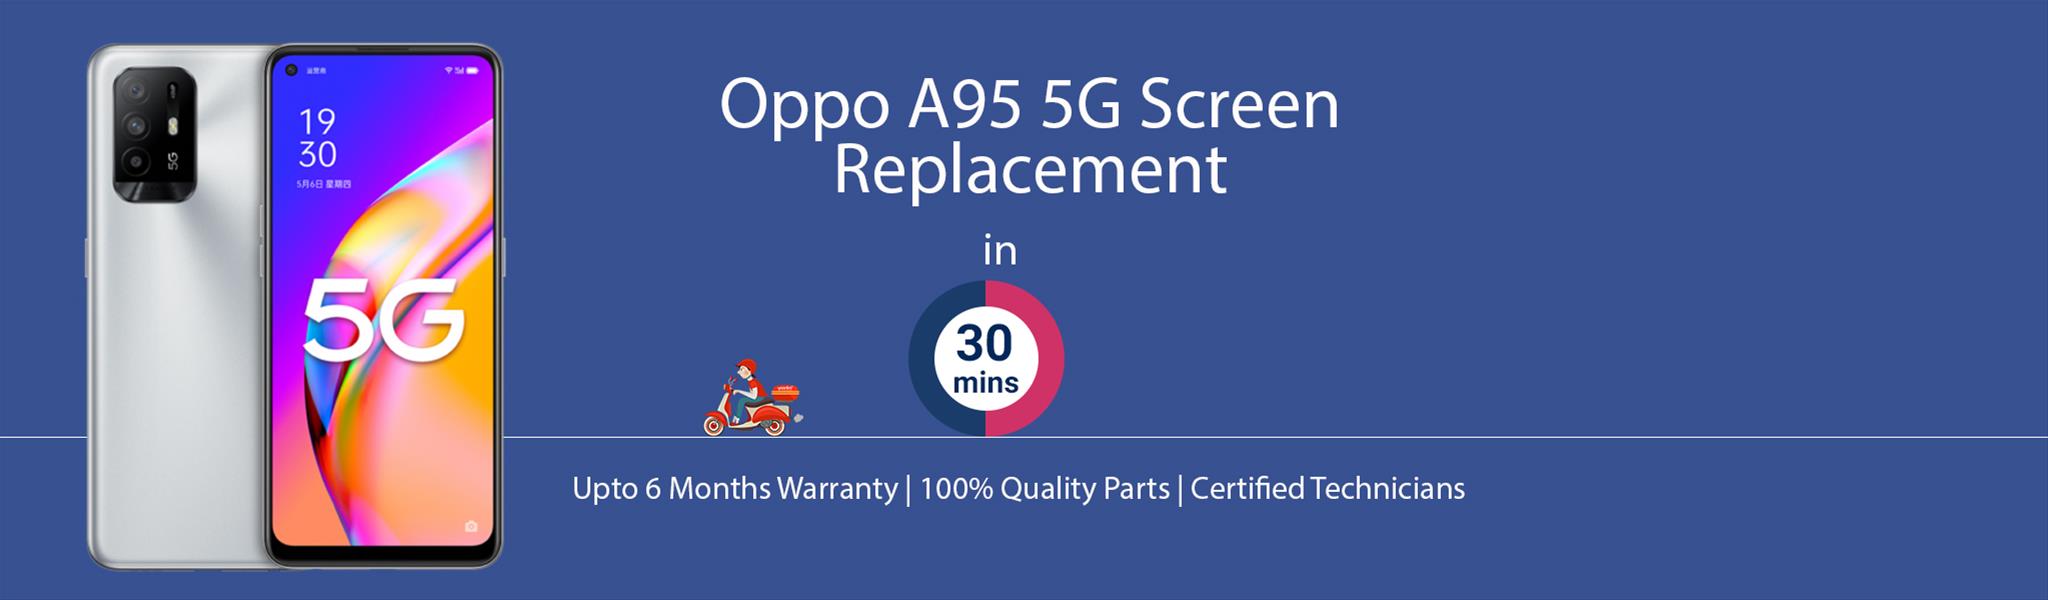 oppo-a95-5g-screen-replacement.jpg